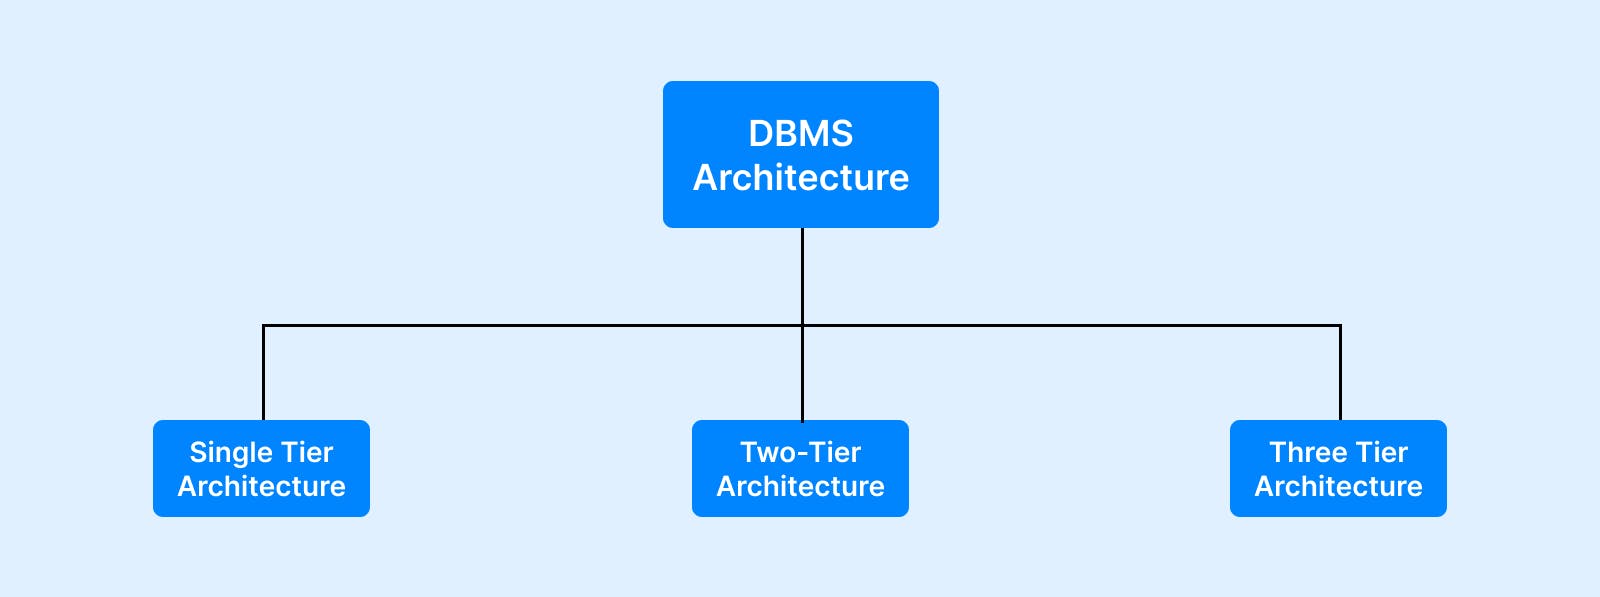 Types of architecture in DBMS